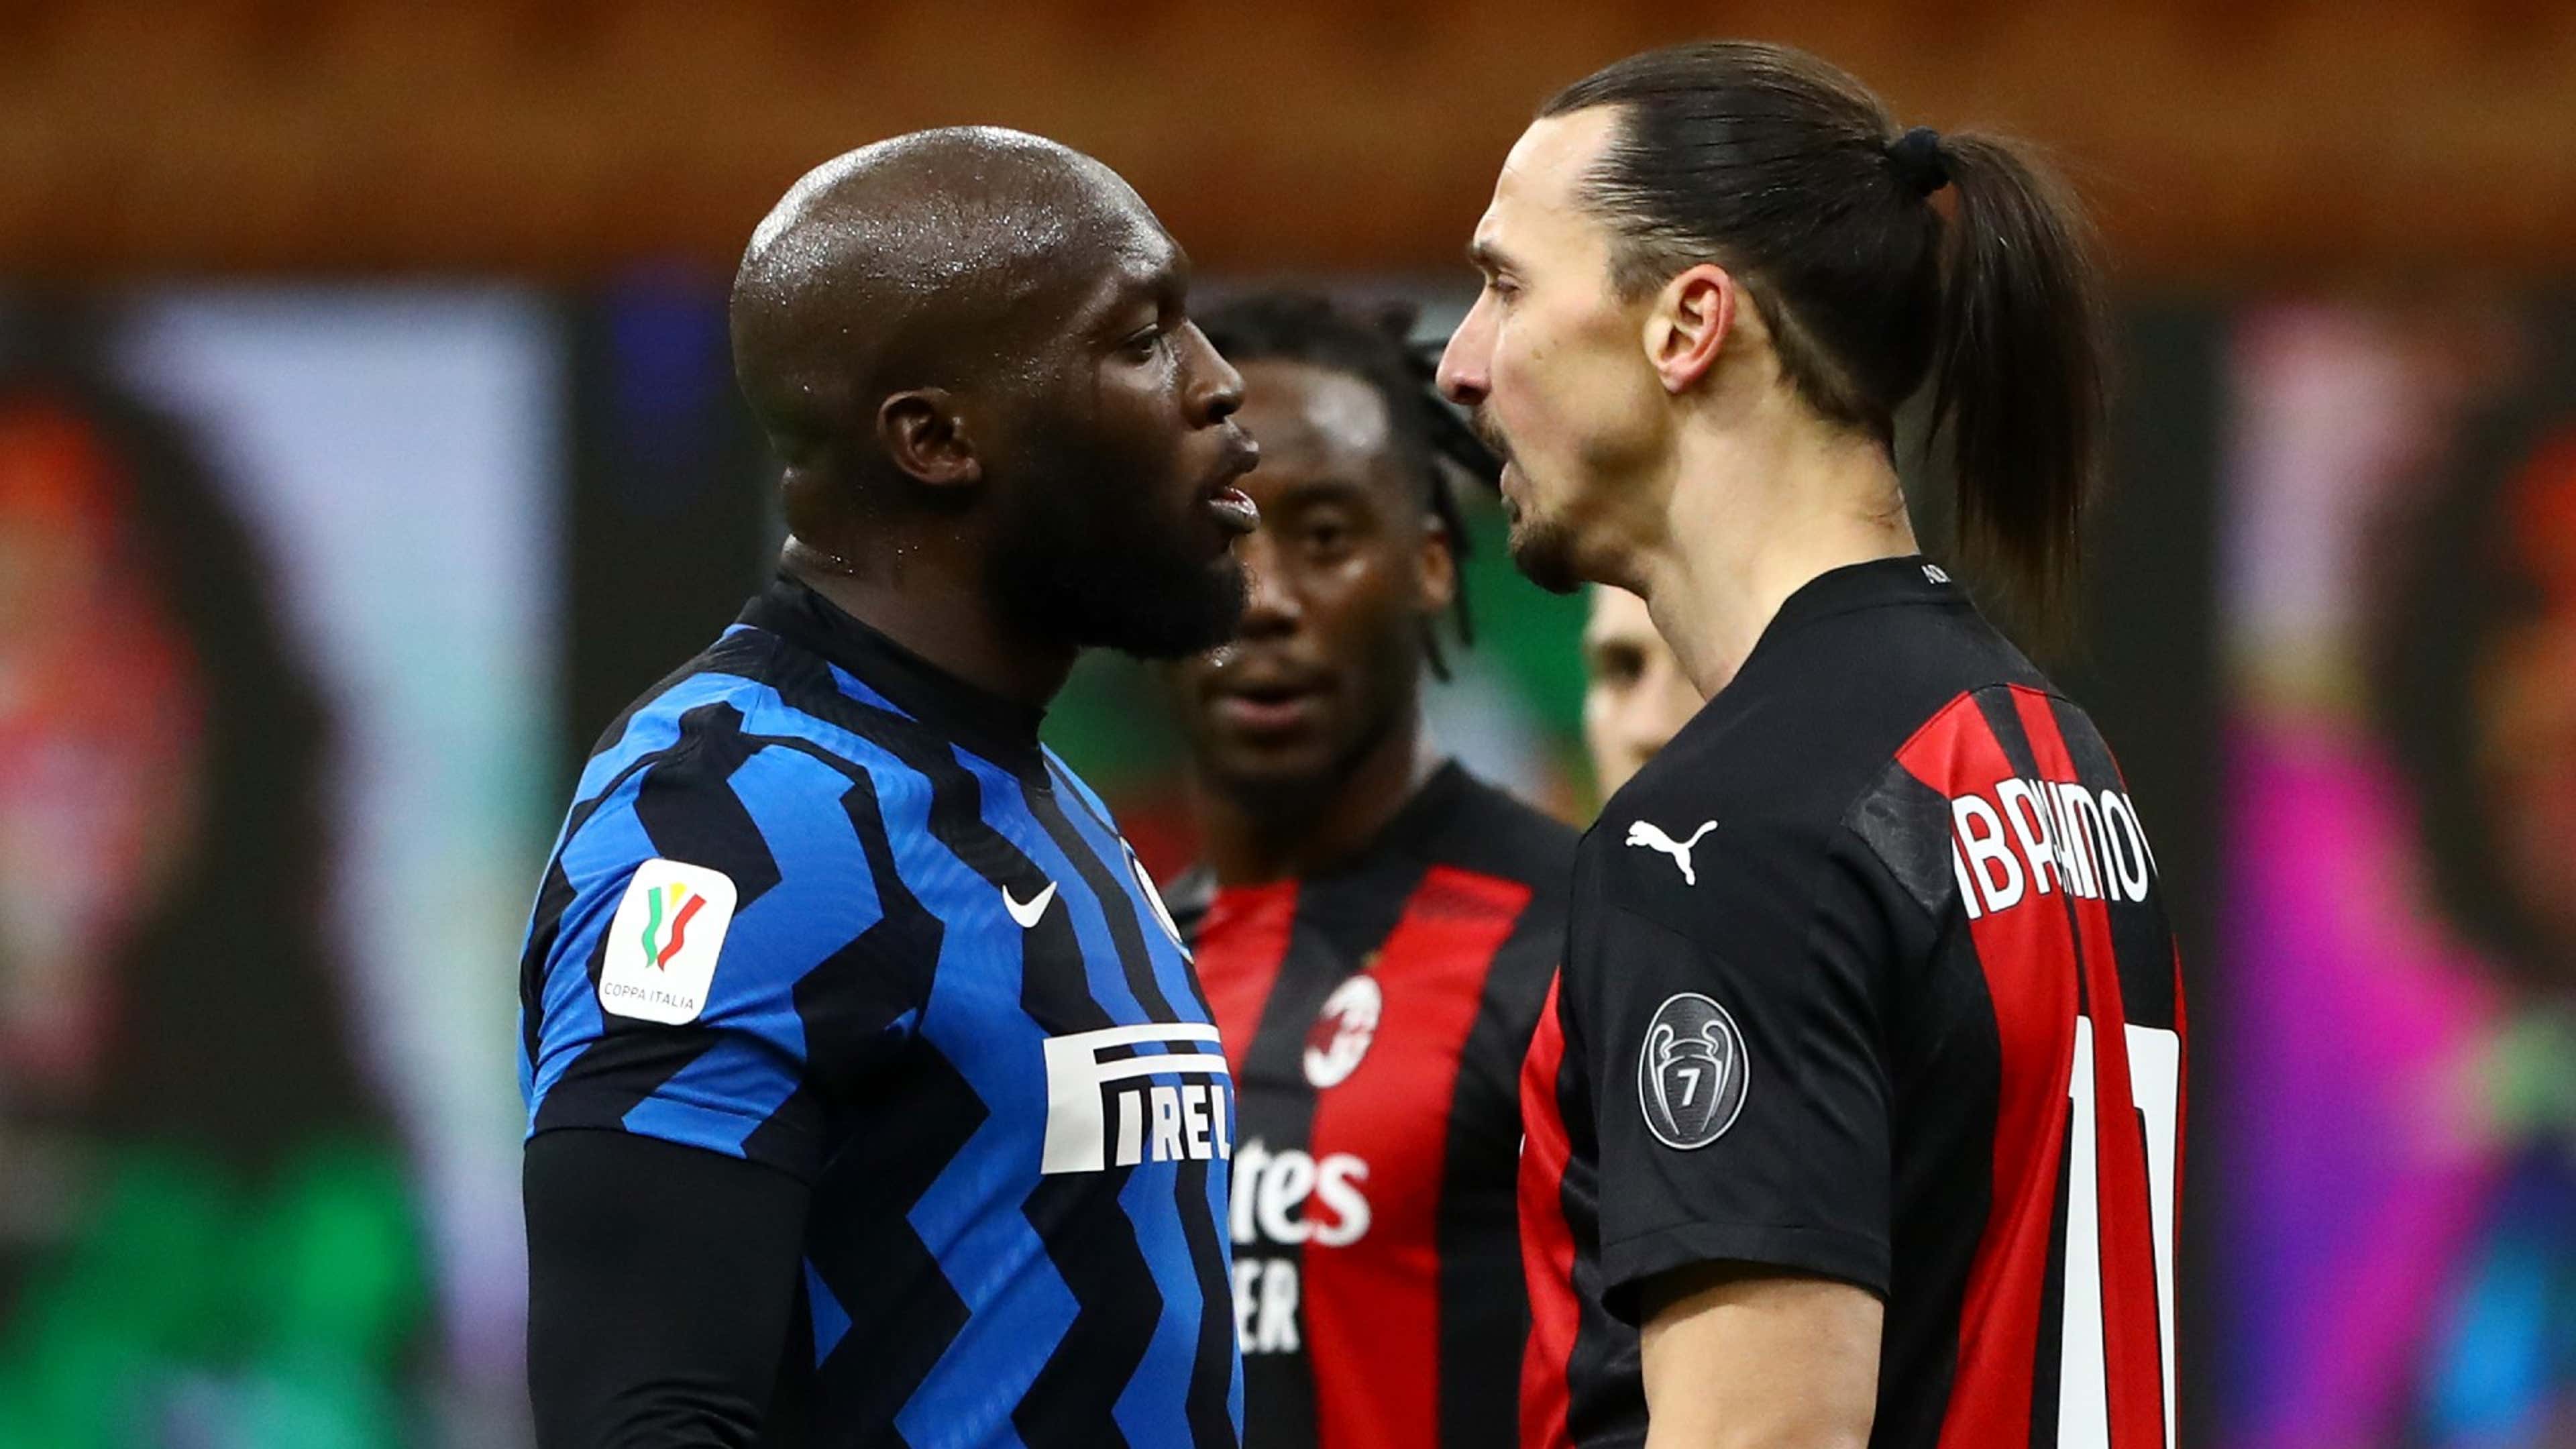 Let S Go Inside You B Tch Ibrahimovic And Lukaku Square Off In Fiery Milan Derby